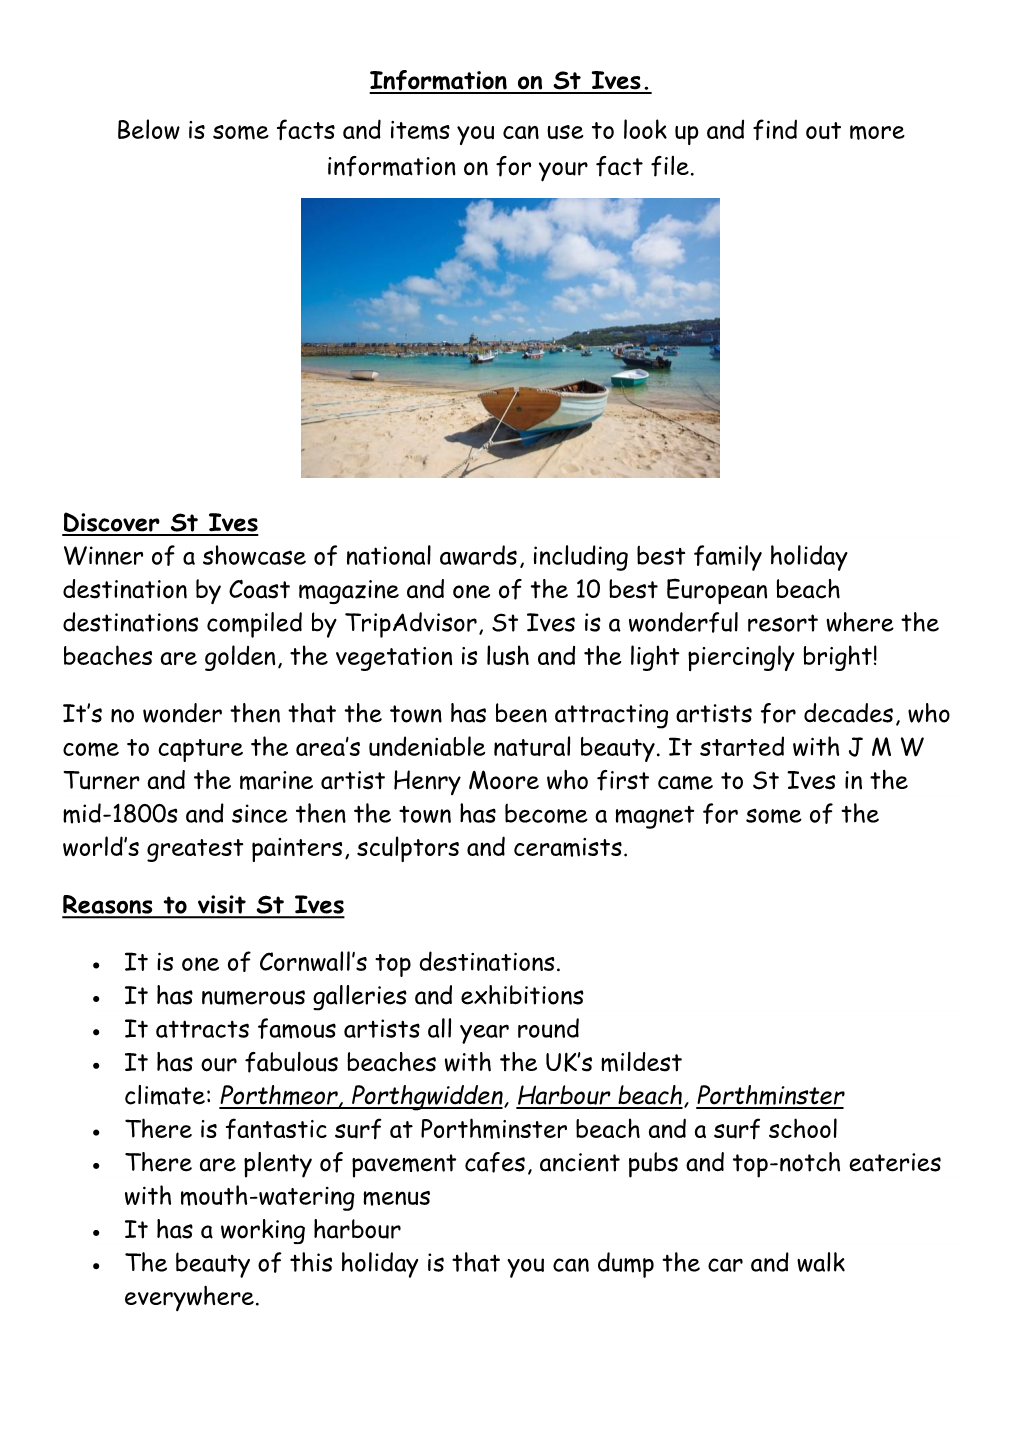 Information on St Ives. Below Is Some Facts and Items You Can Use to Look